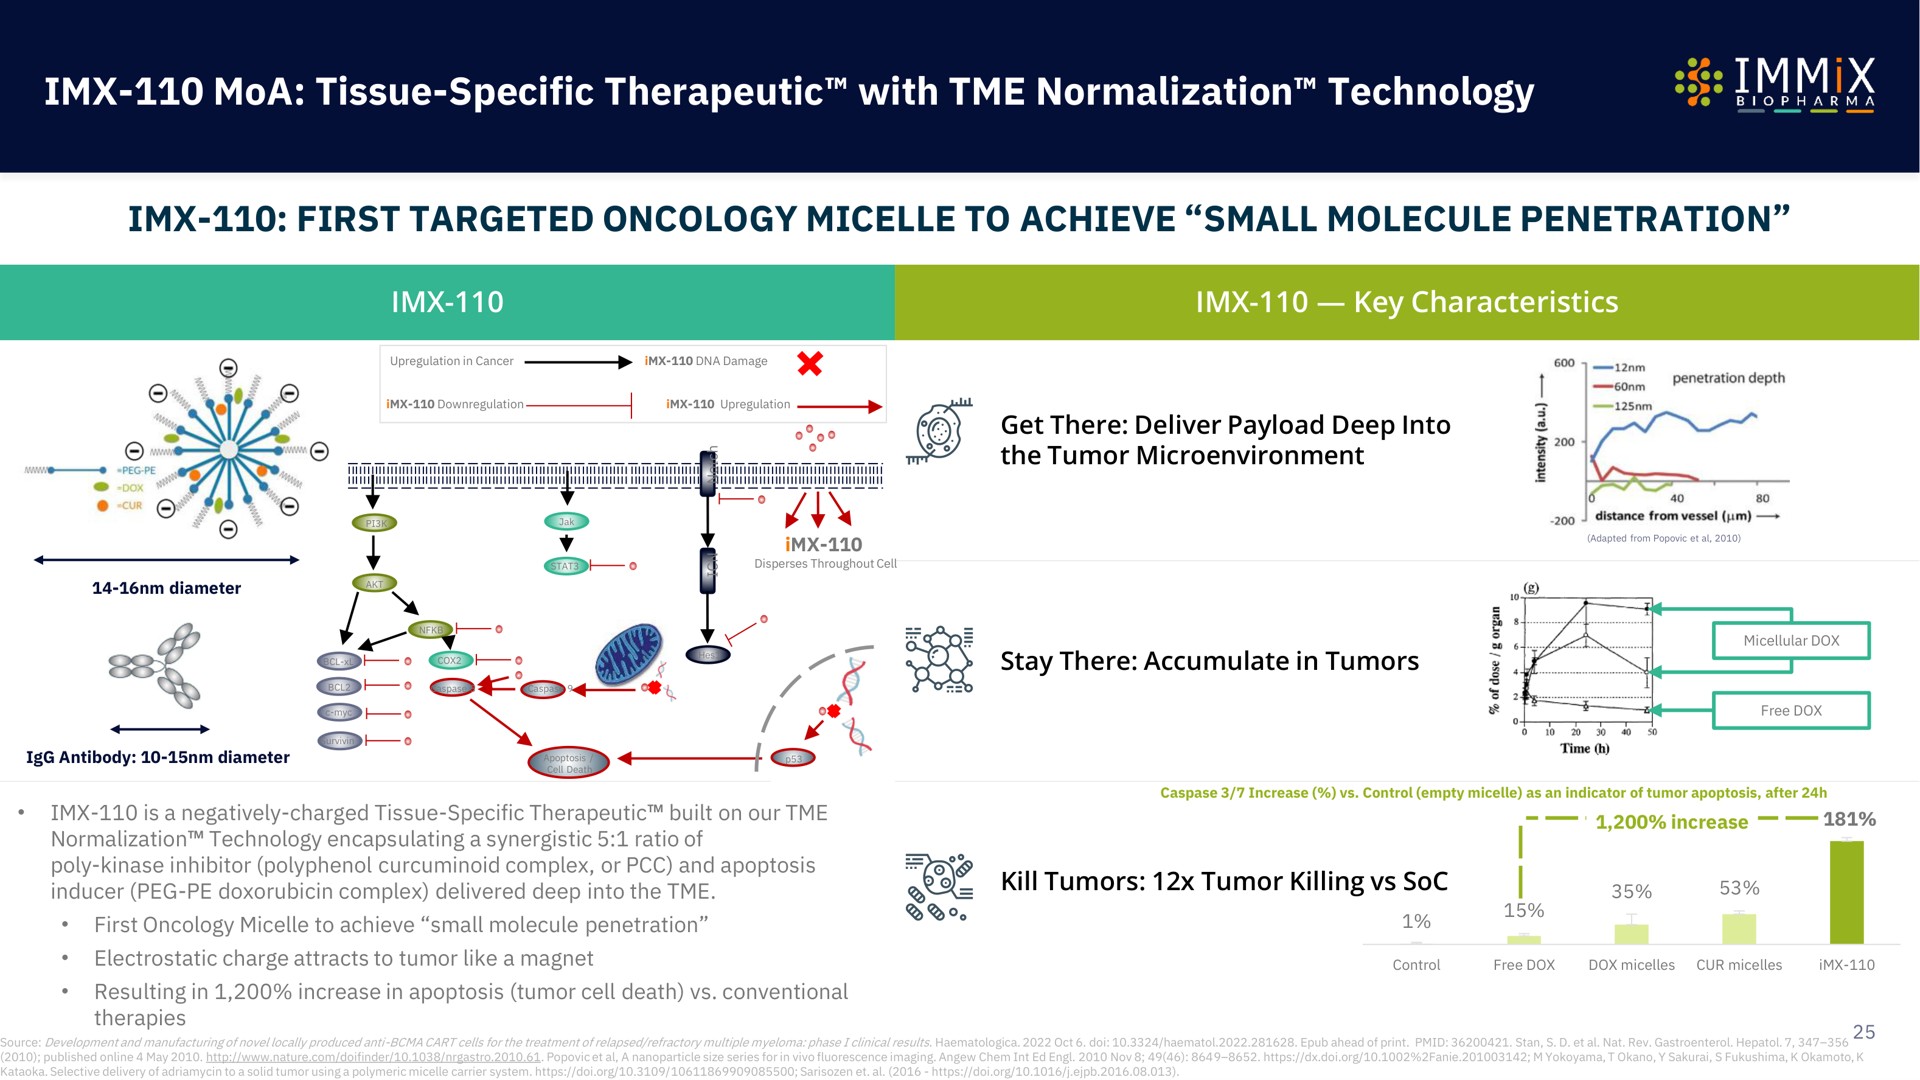 tissue specific therapeutic with normalization technology first targeted oncology micelle to achieve small molecule penetration is | Immix Biopharma